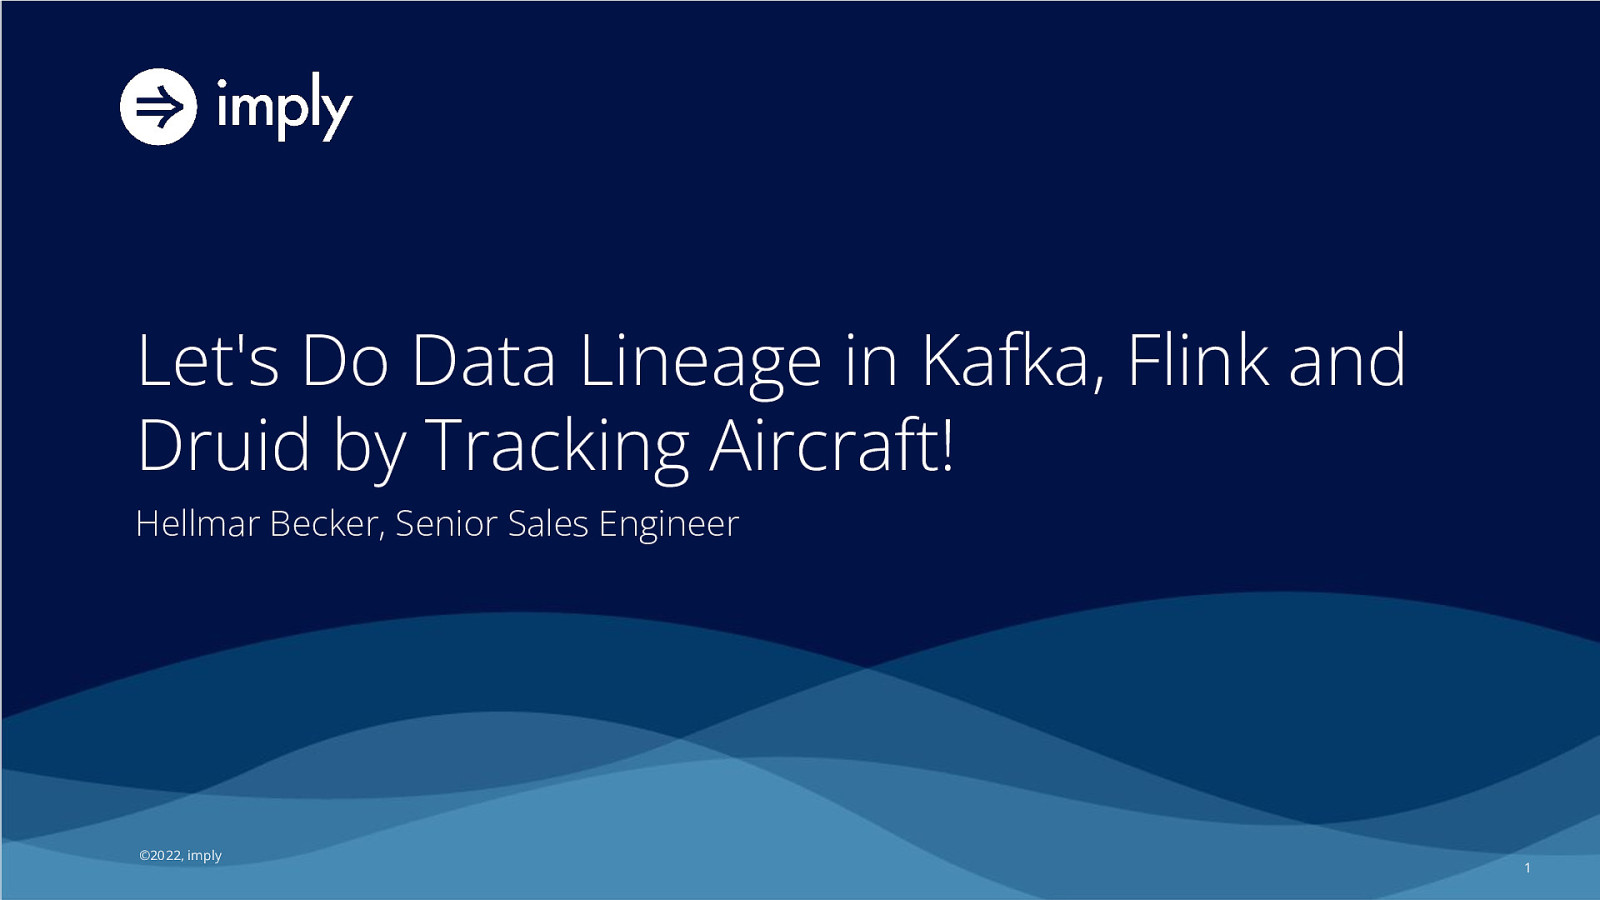 Let’s Do Data Lineage in Kafka, Flink and Druid by Tracking Aircraft!